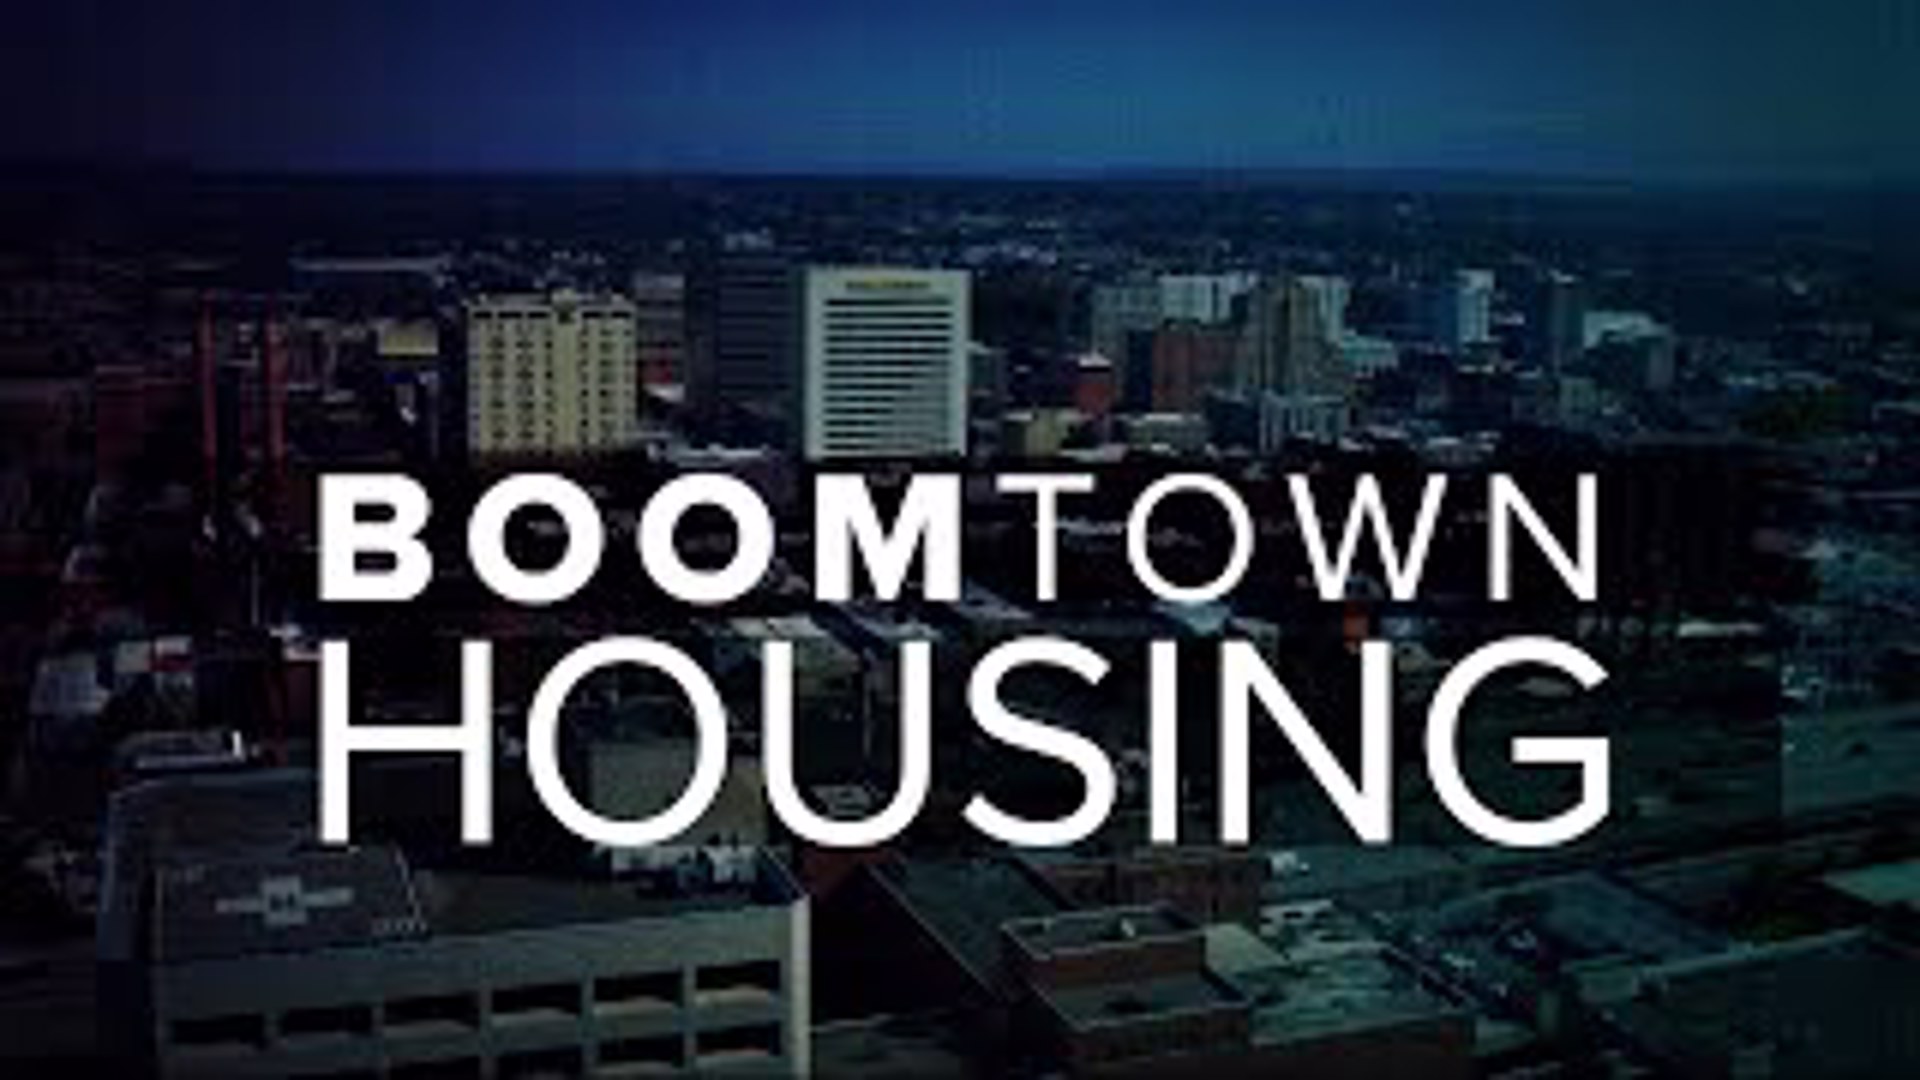 In this KREM 2 News Boomtown special we take a closer look at housing, what is driving up costs, and the impact it has on homeowners, renters, and homelessness.